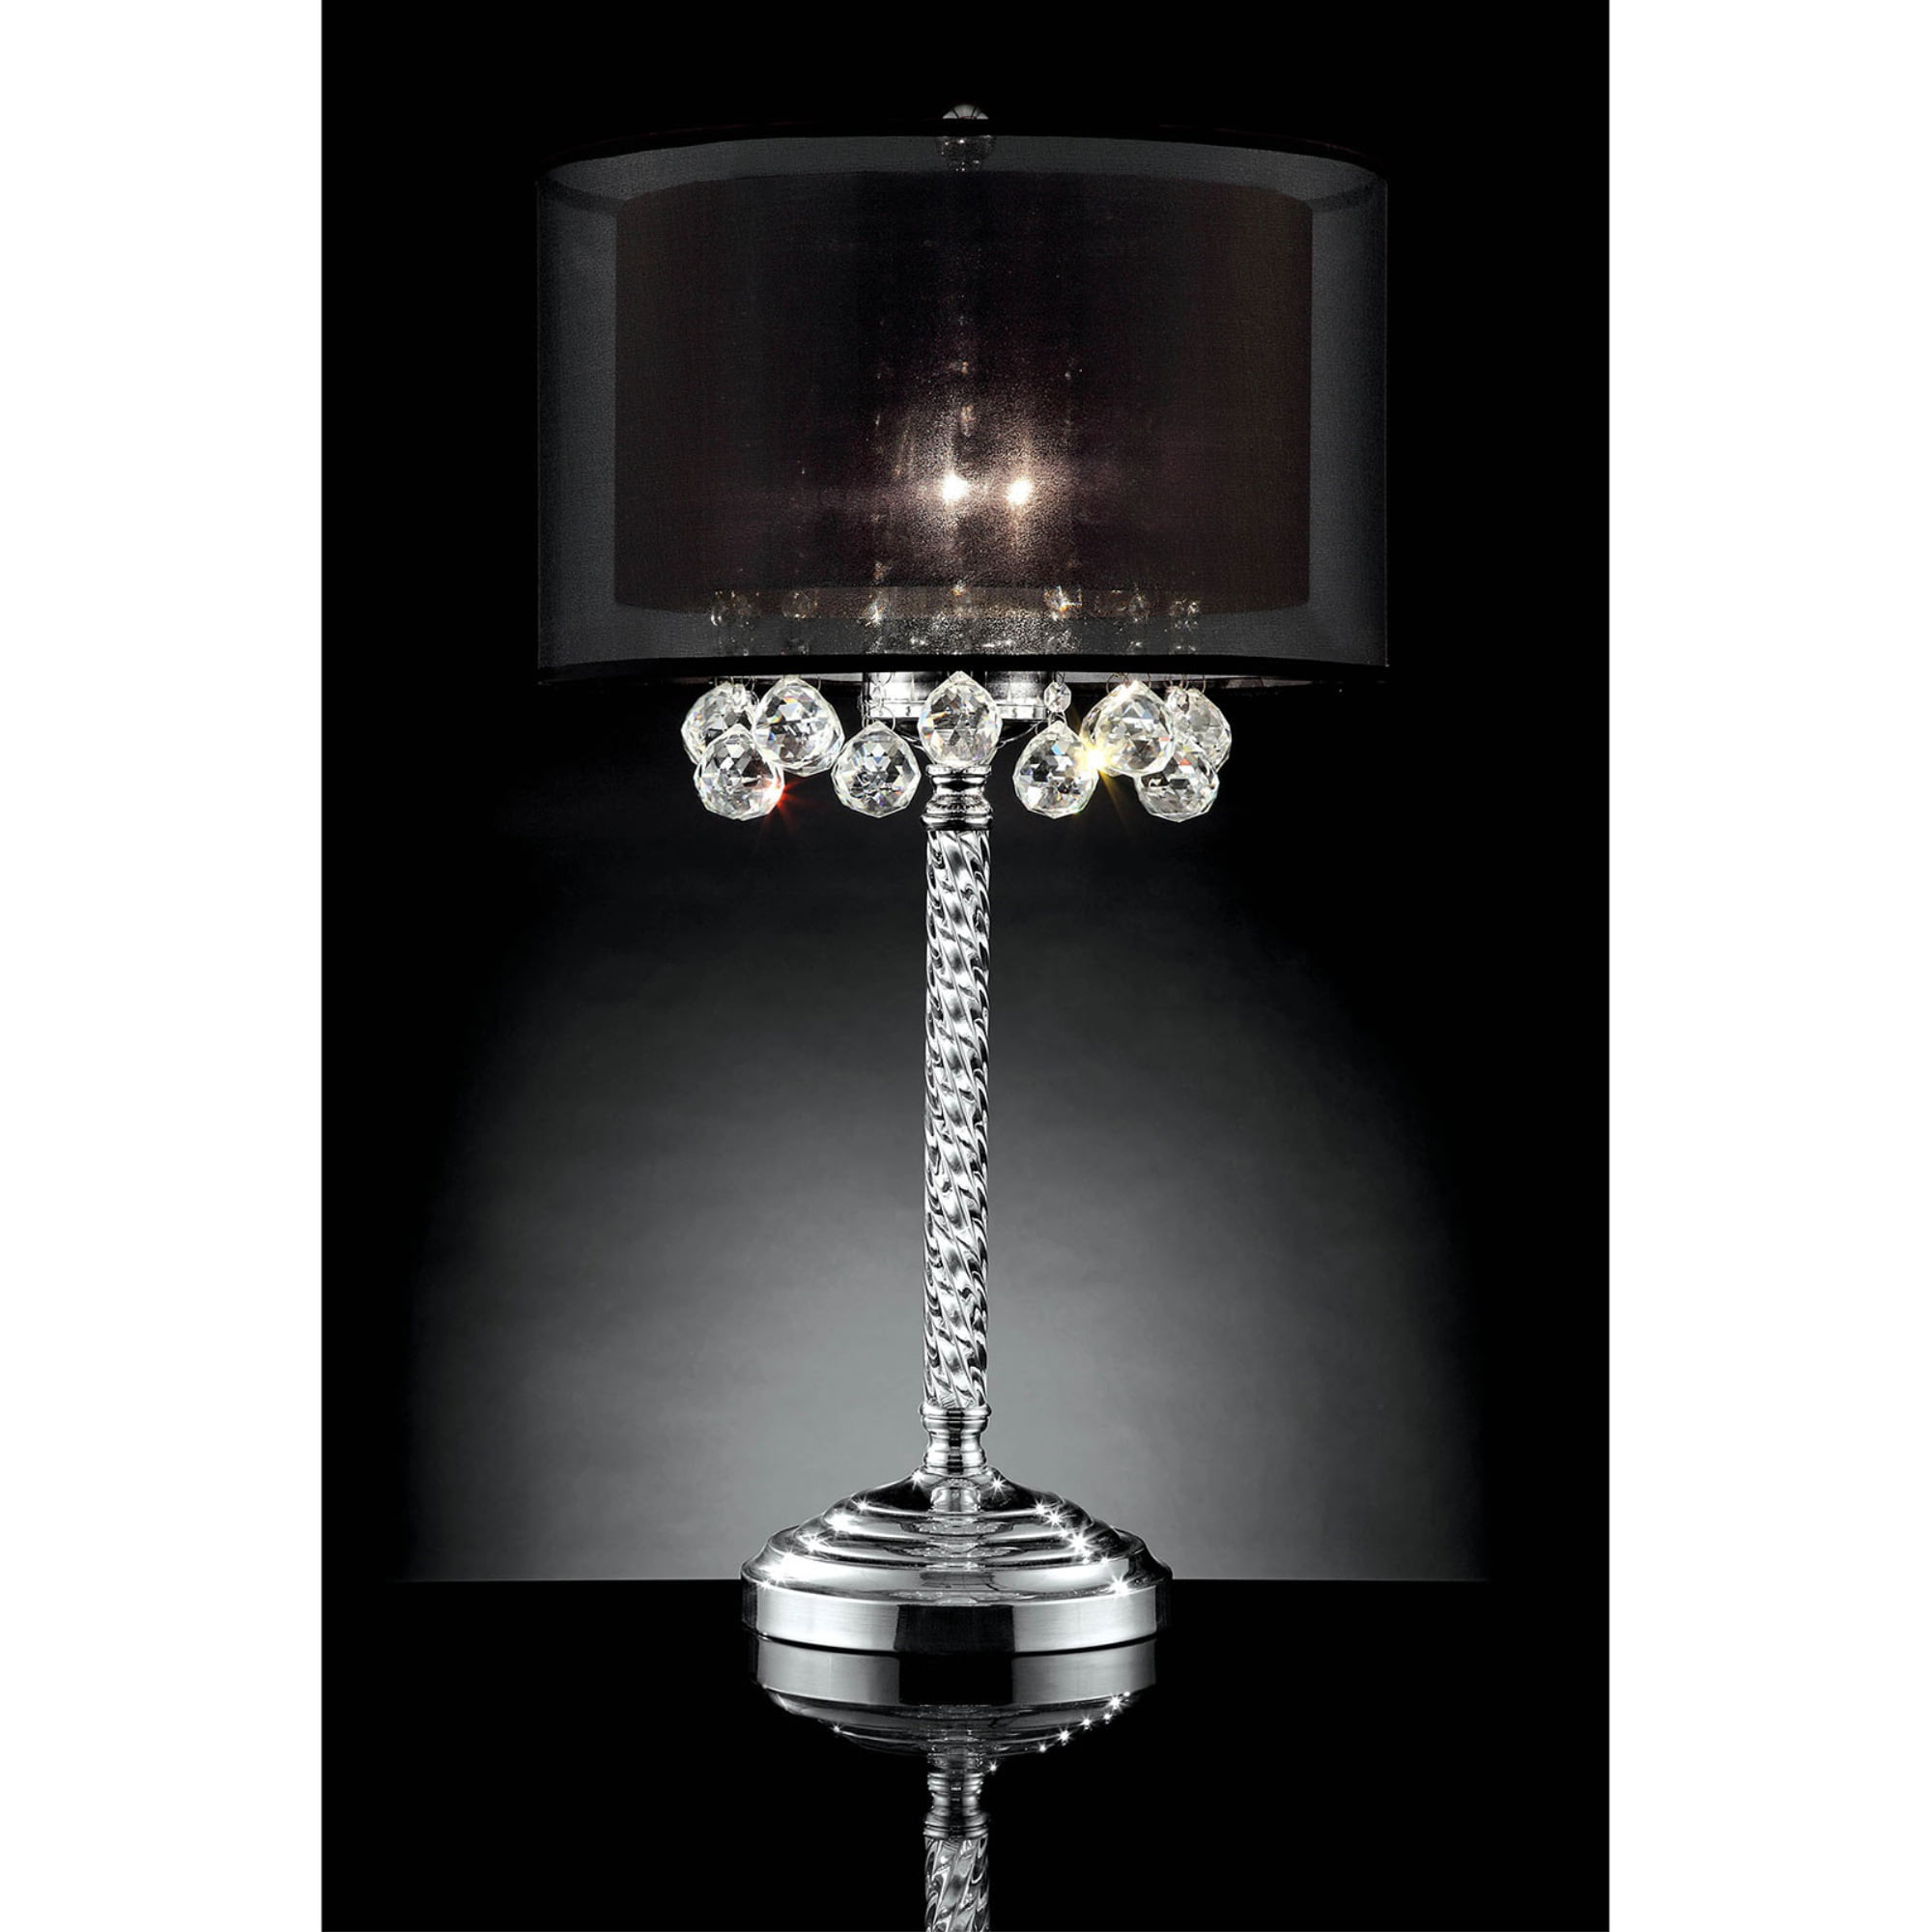 Table Lamp With Twisted Crystal Stand, White Lamp Shade With Hanging Crystals